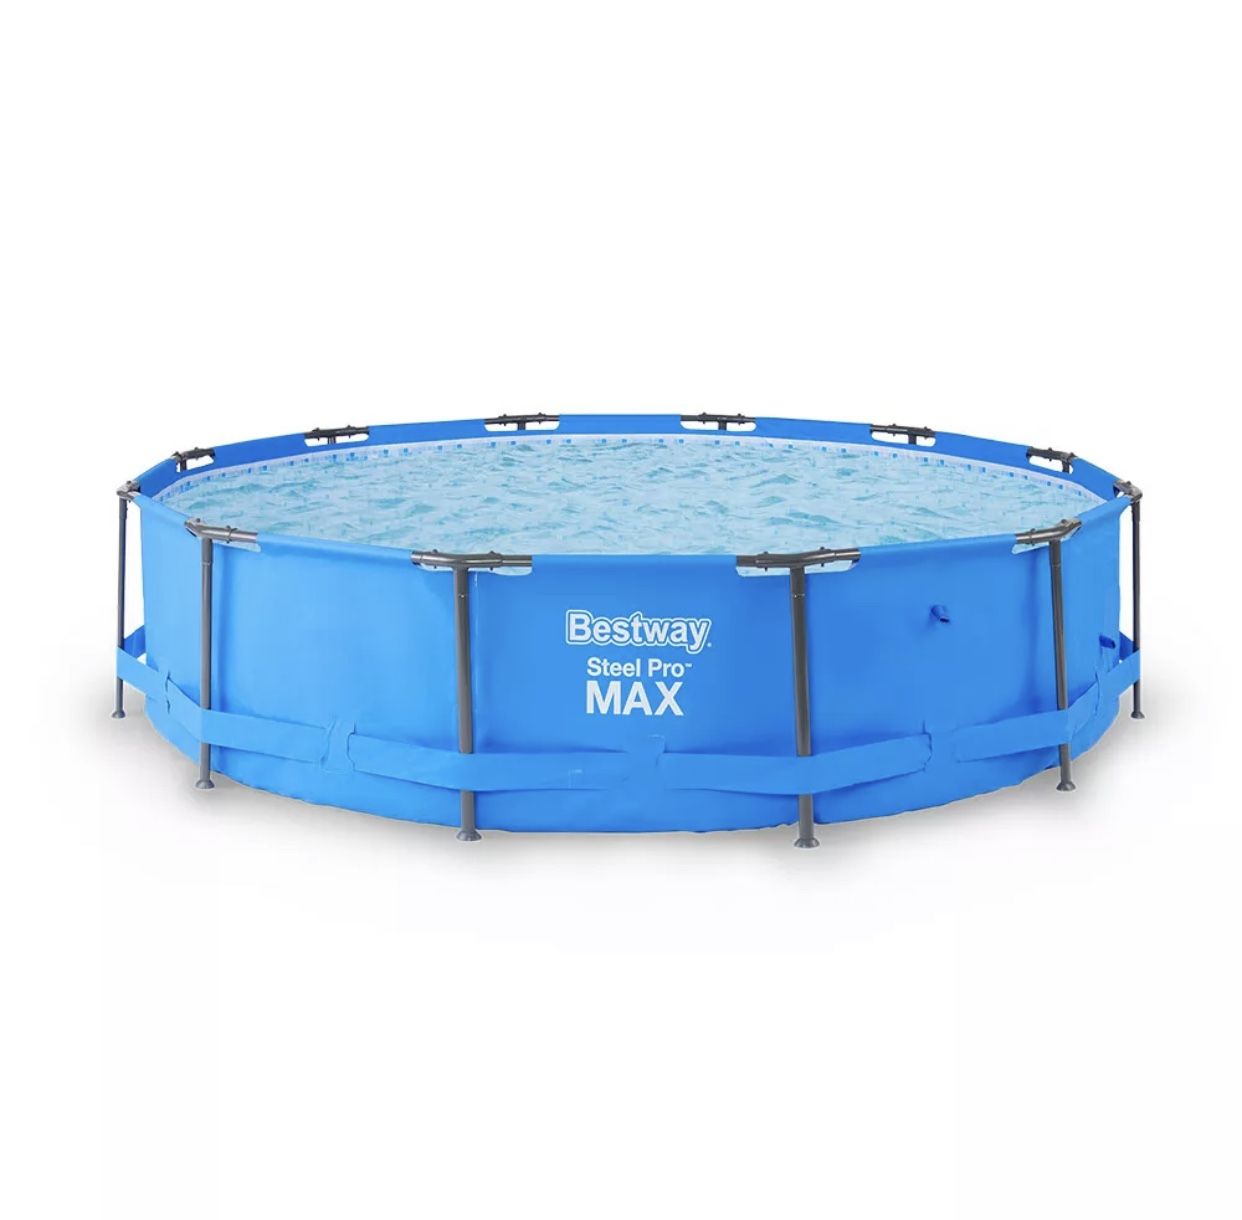 Bestway Steel Pro Max 15ft x 42in Frame Above Ground Swimming Pool Set with Pump